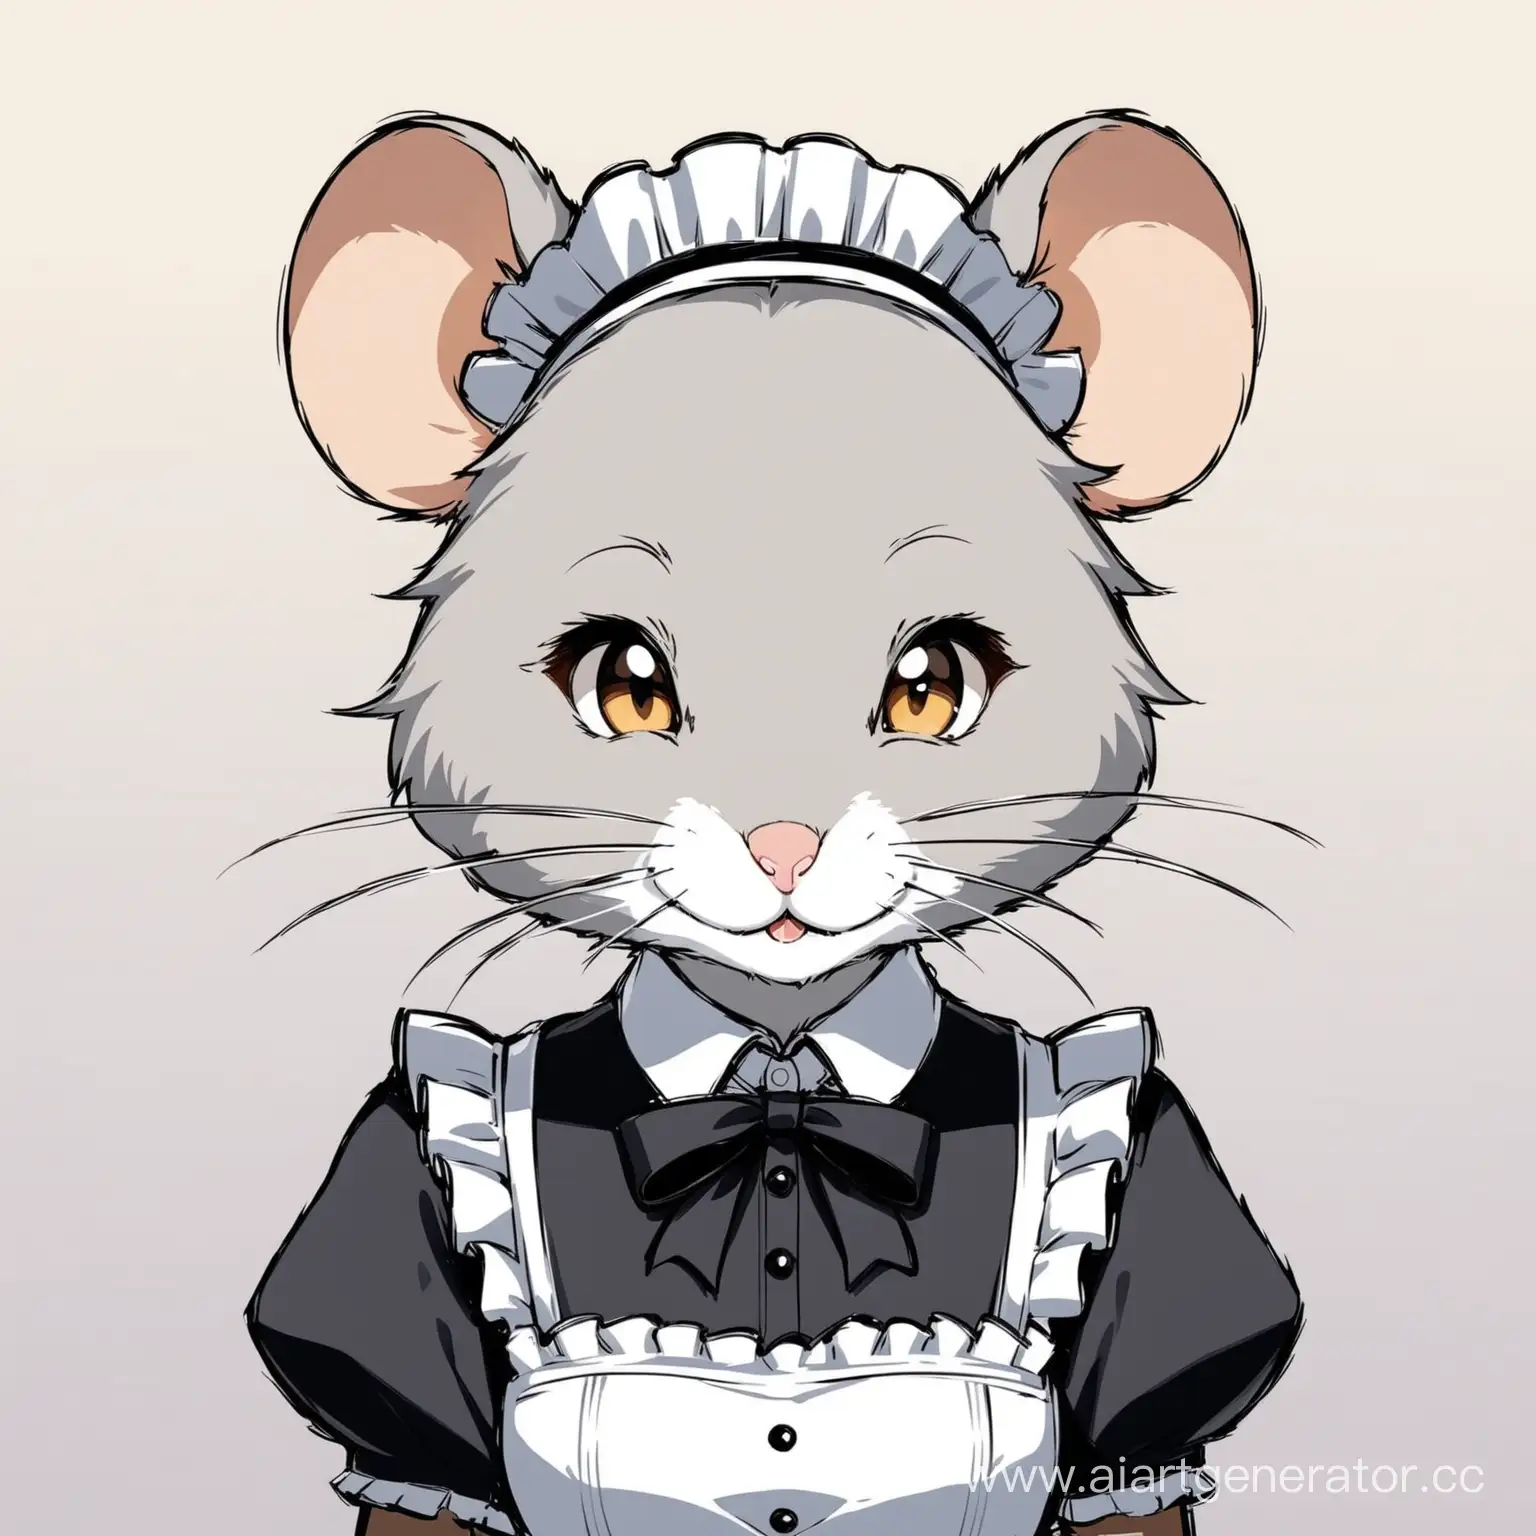 Gray-Furry-Mouse-Maid-Avatar-with-Whimsical-Accessories